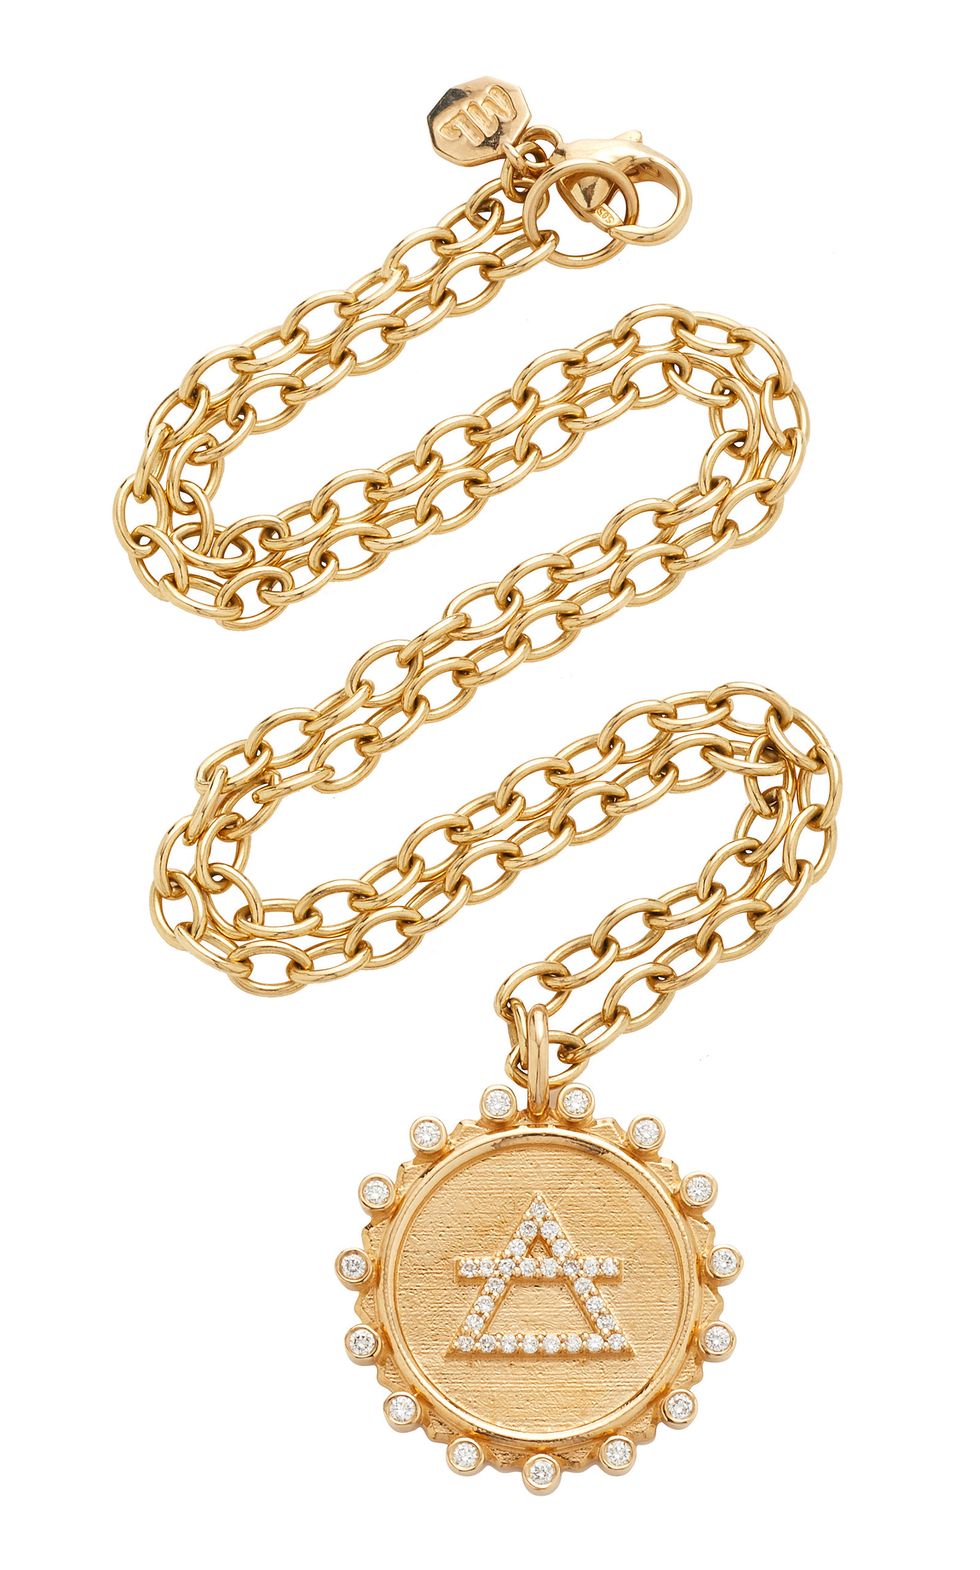 In The Air 14K Gold Diamond Necklace by Marlo Laz